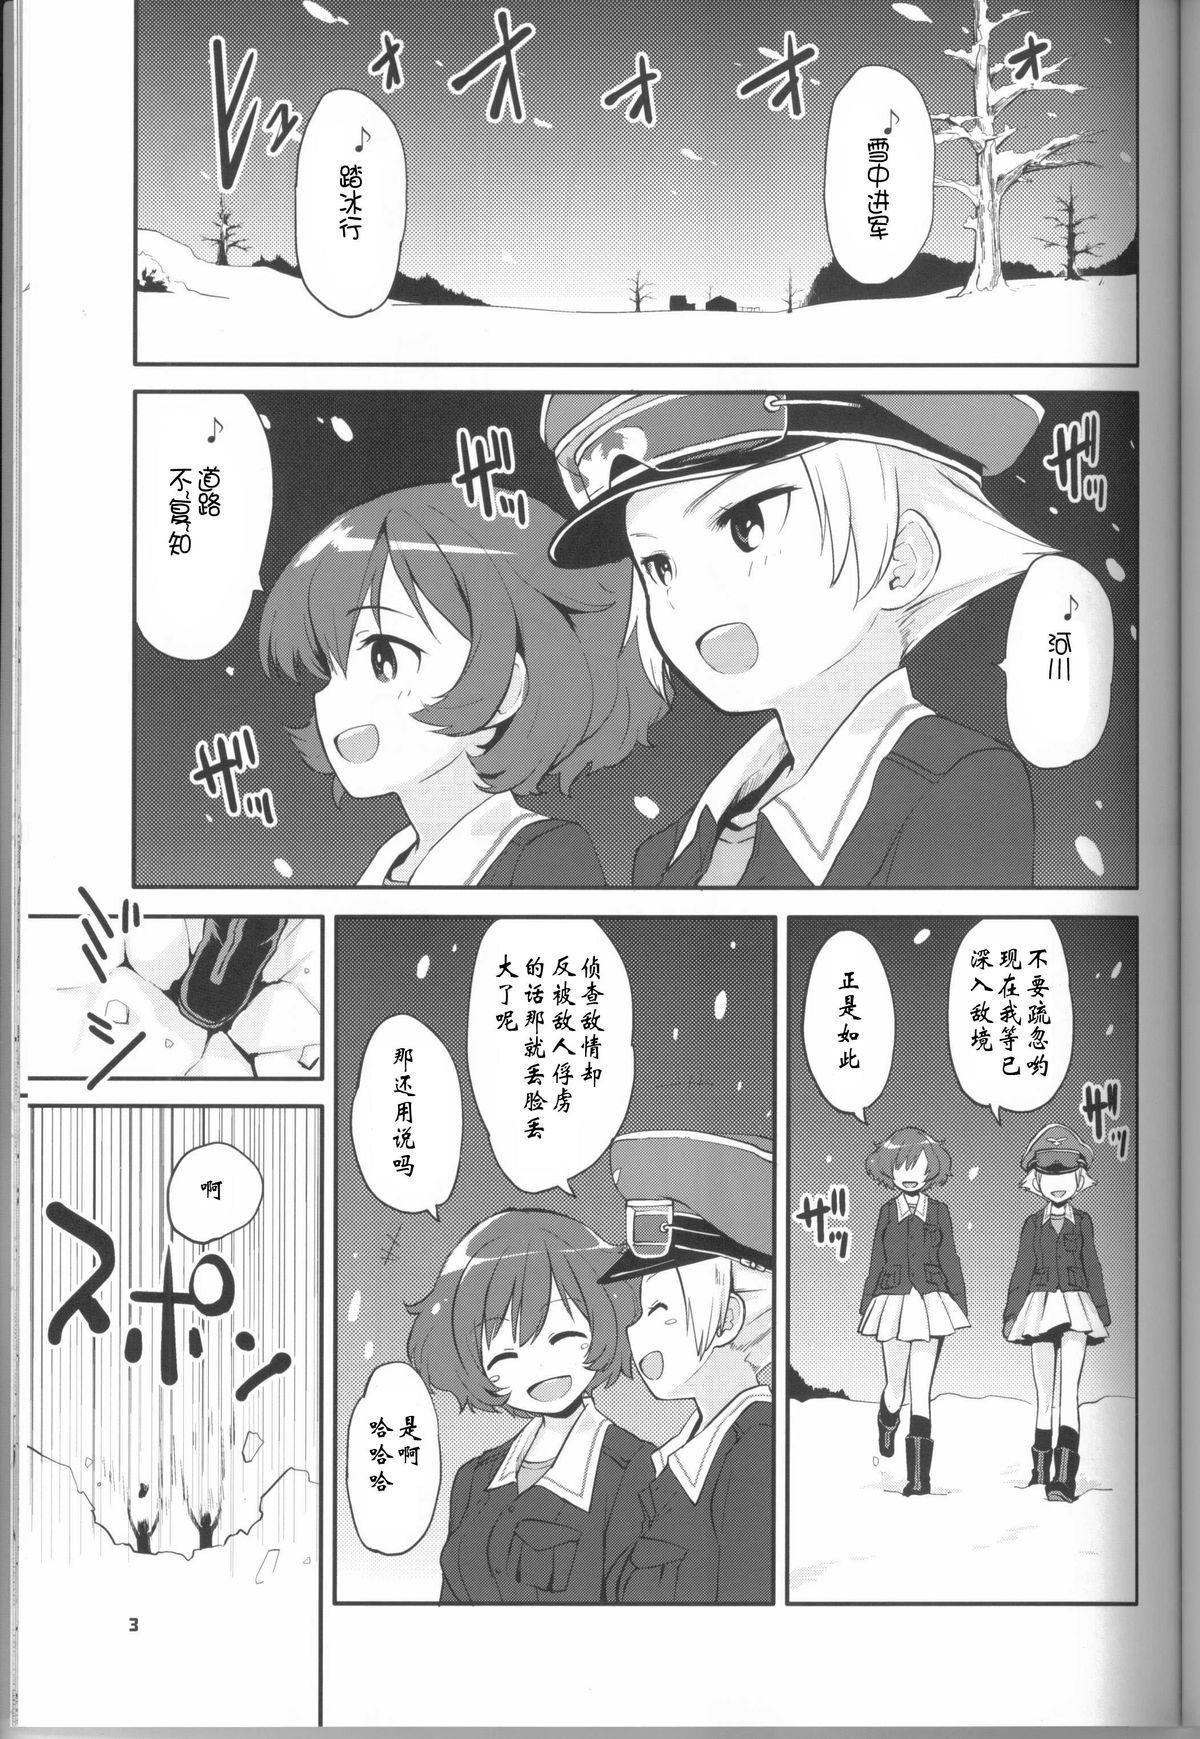 Bangbros The General Frost Has Come! - Girls und panzer Slapping - Page 2